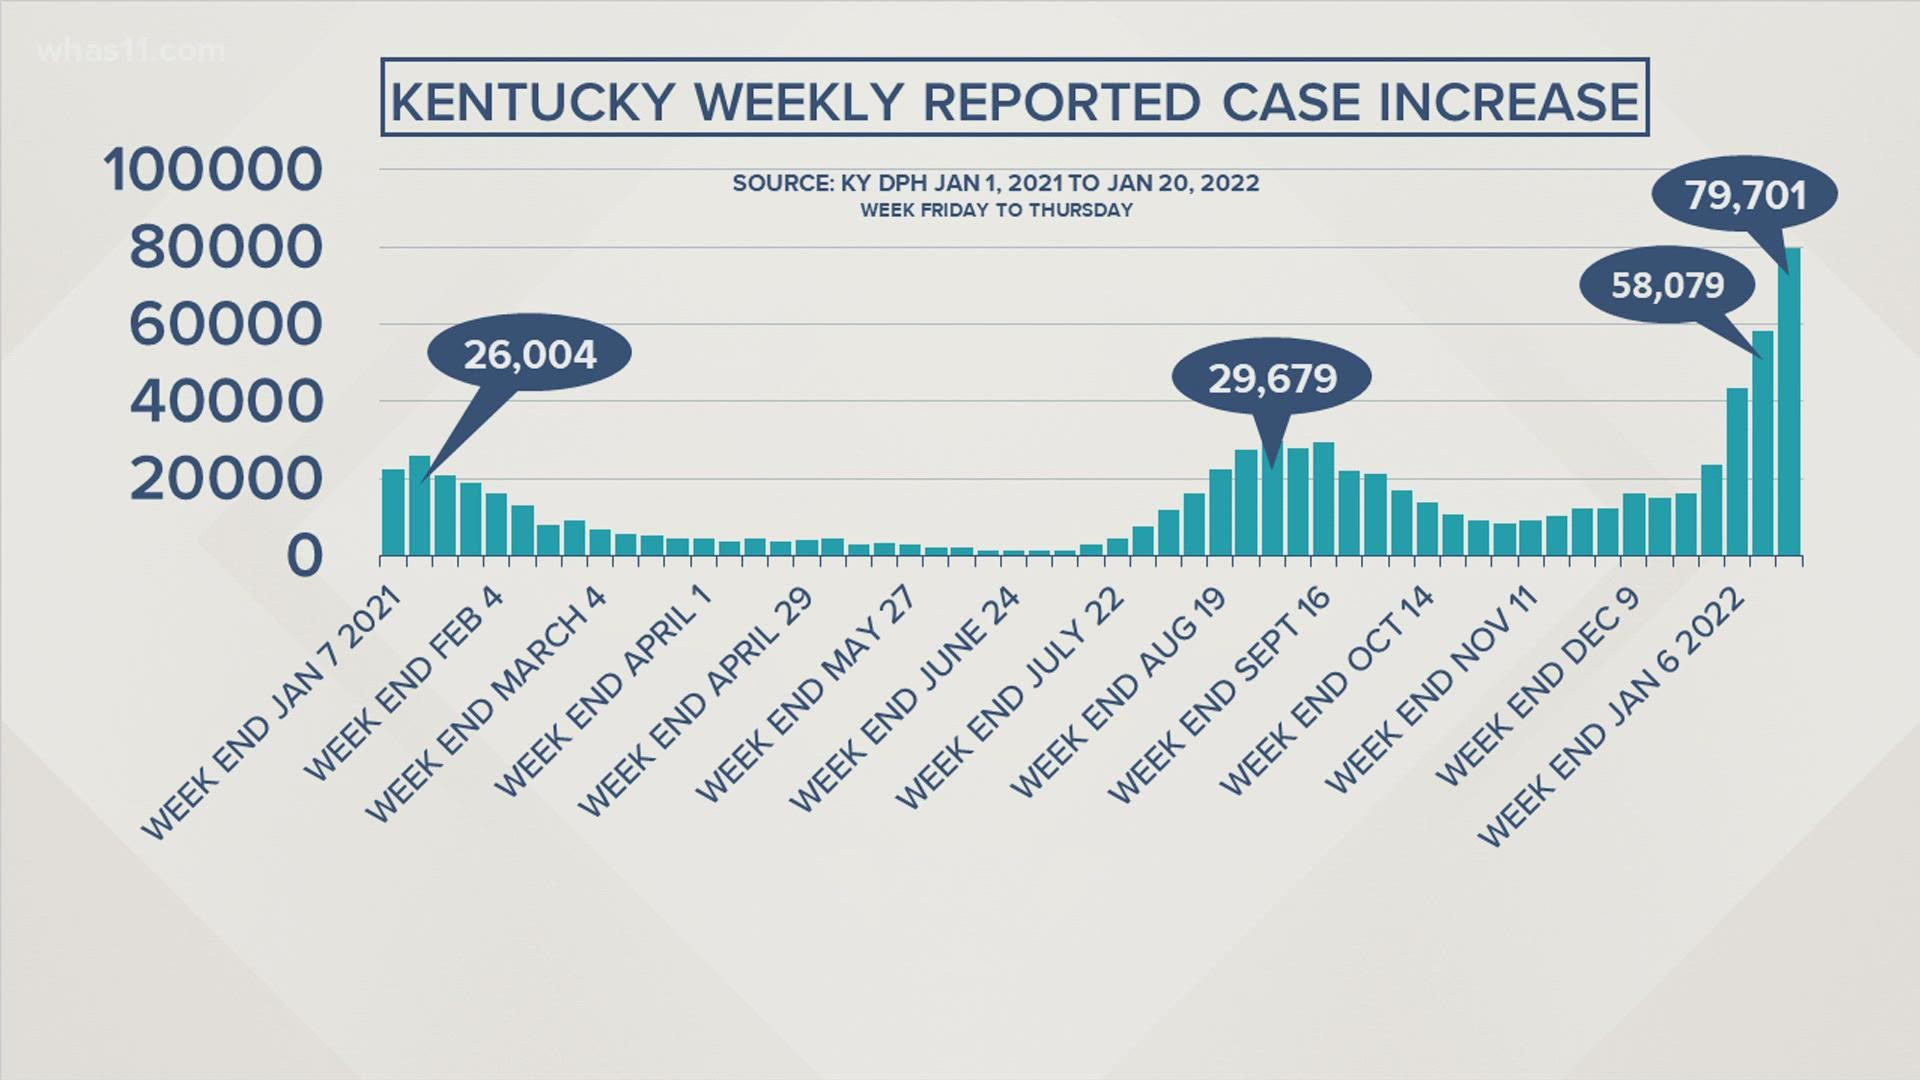 Nearly 80,000 new cases of COVID-19 were reported in the last week, according to state data.